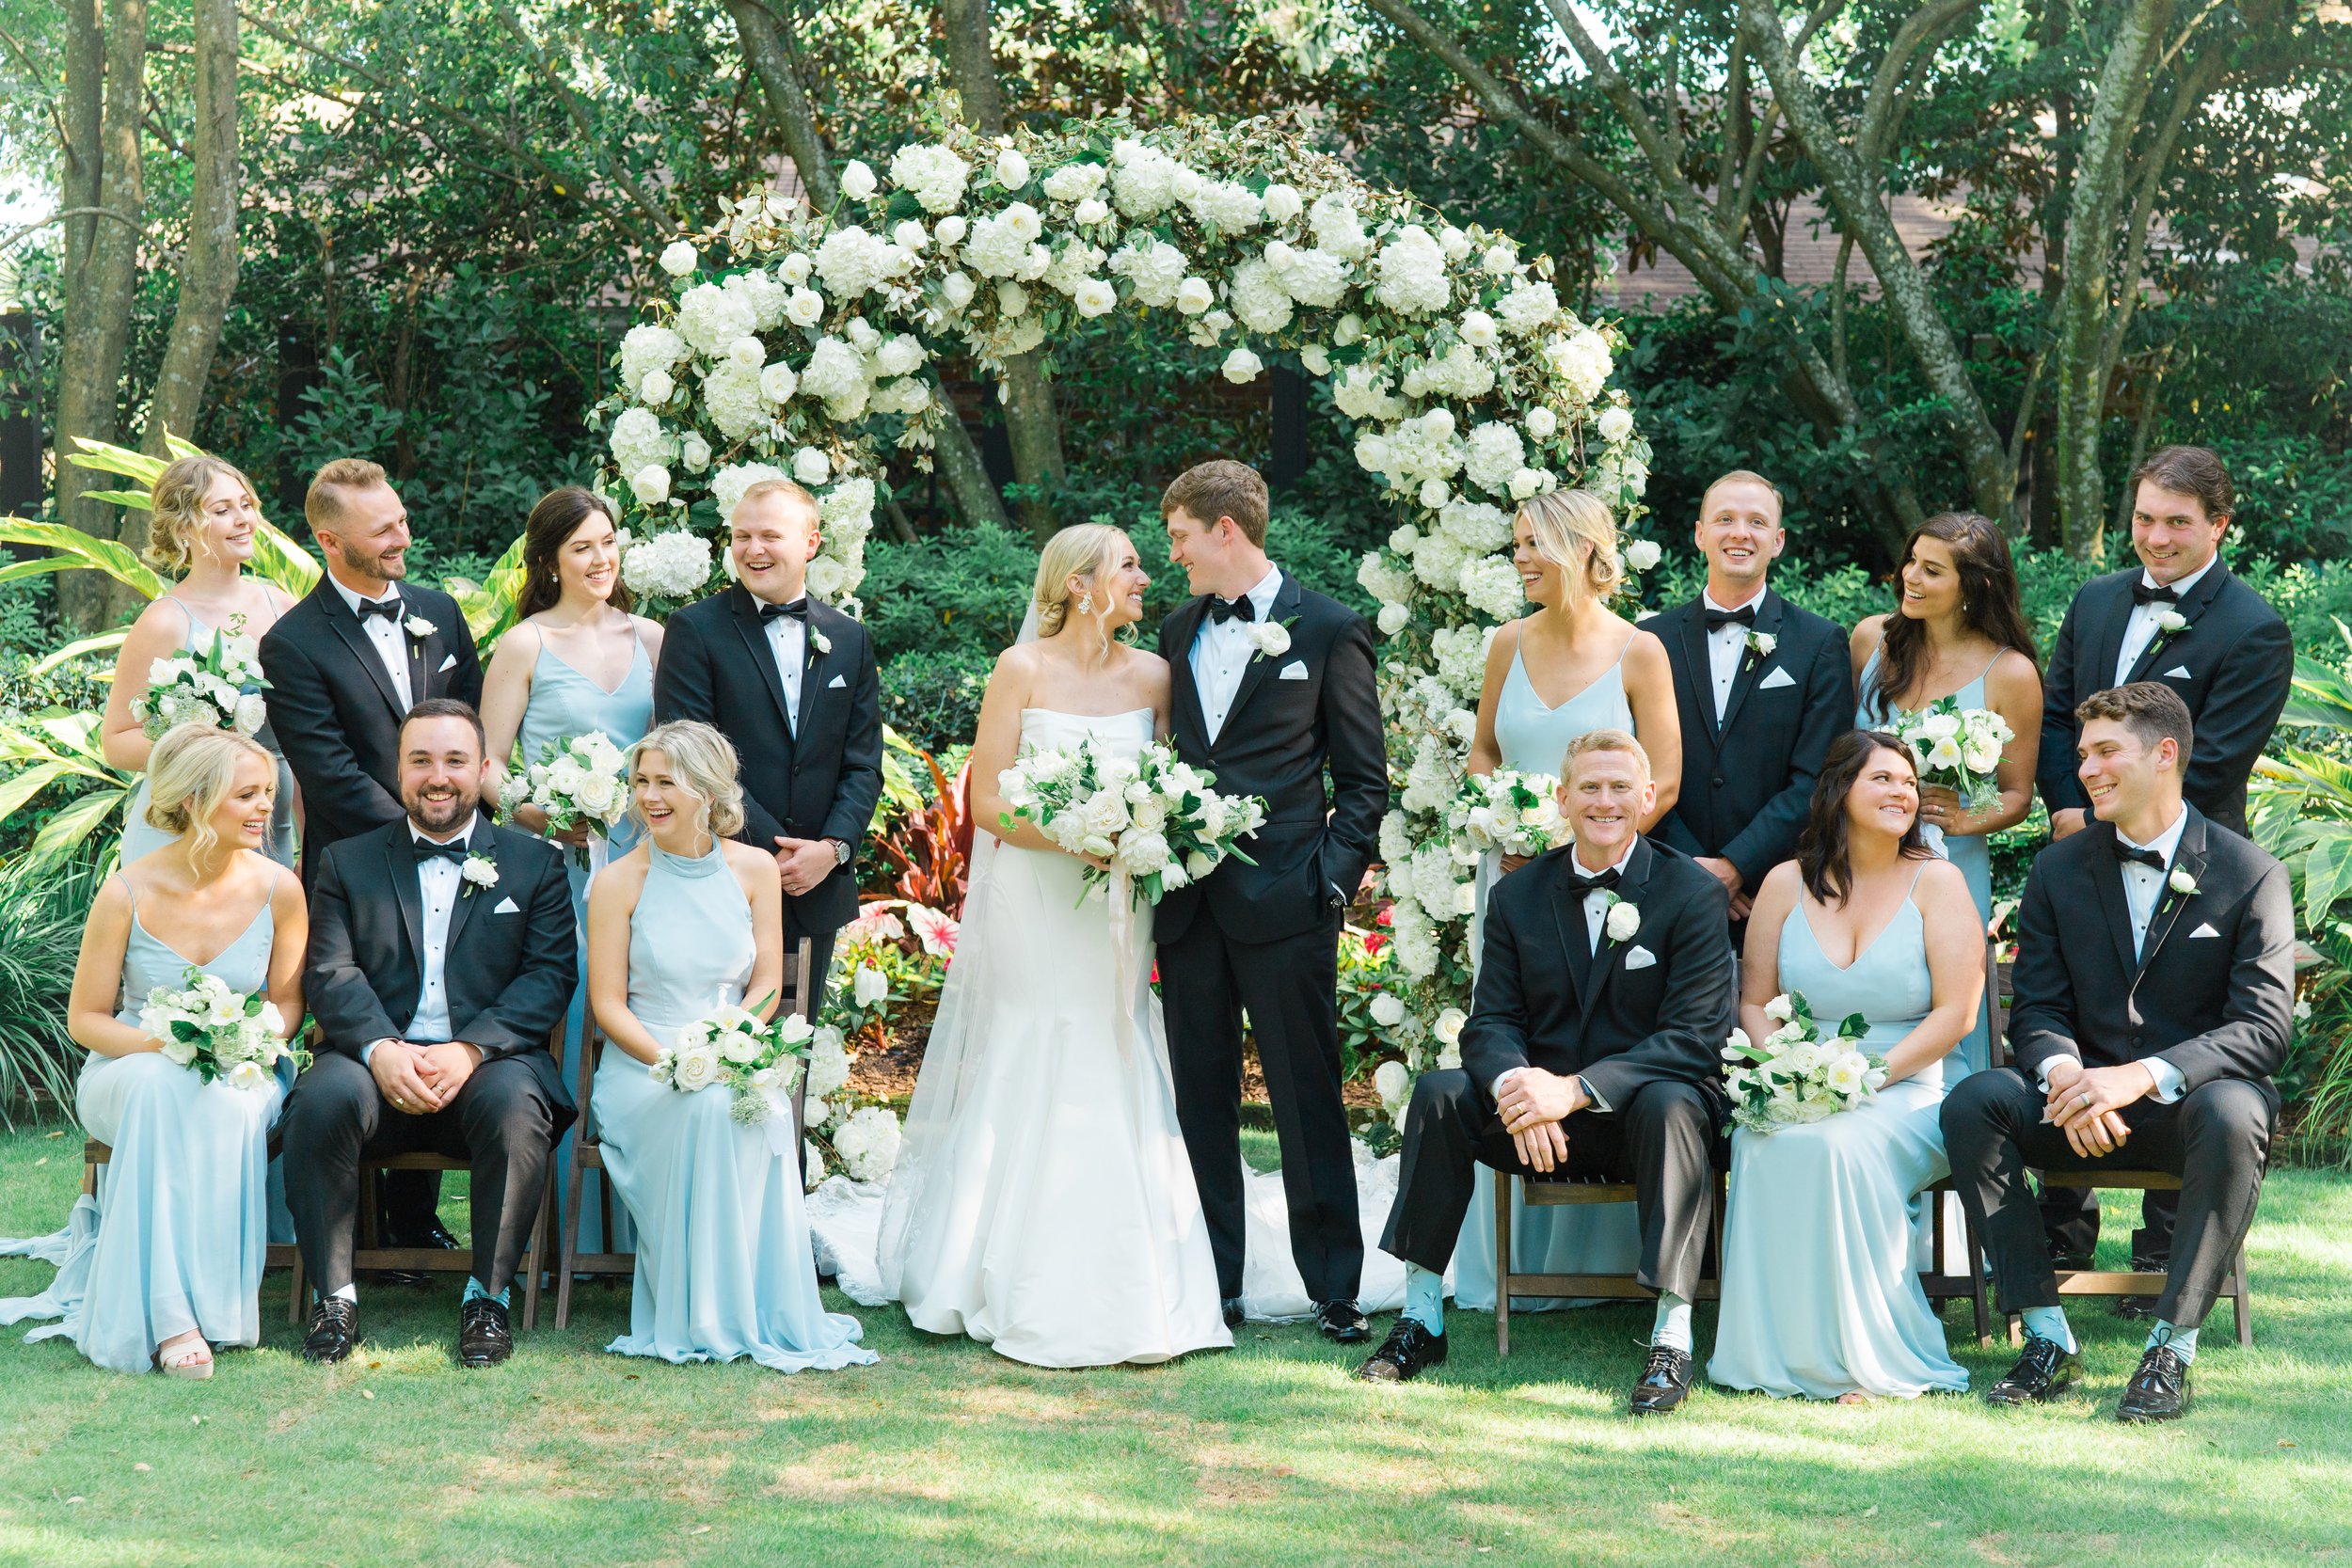 Full bridal party formal picture wit seating. ten foot tall floral arch at wedding ceremony site.